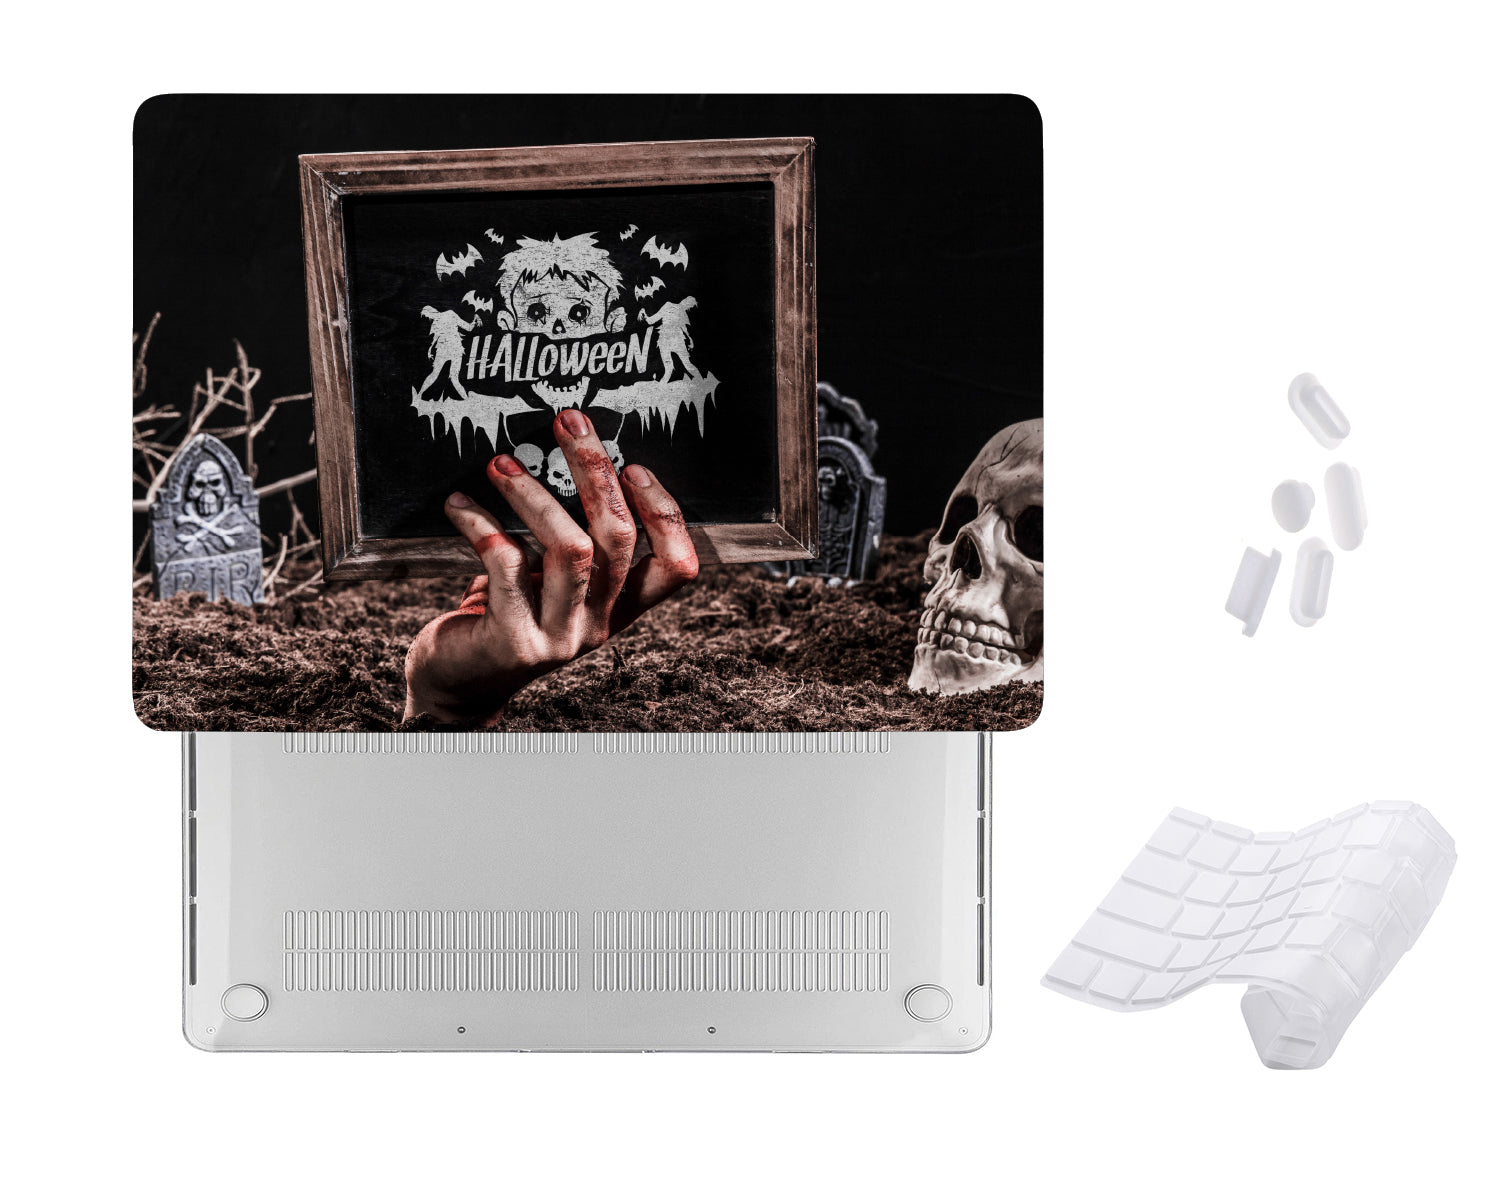 Case Cover for Macbook - Halloween Ghost Design